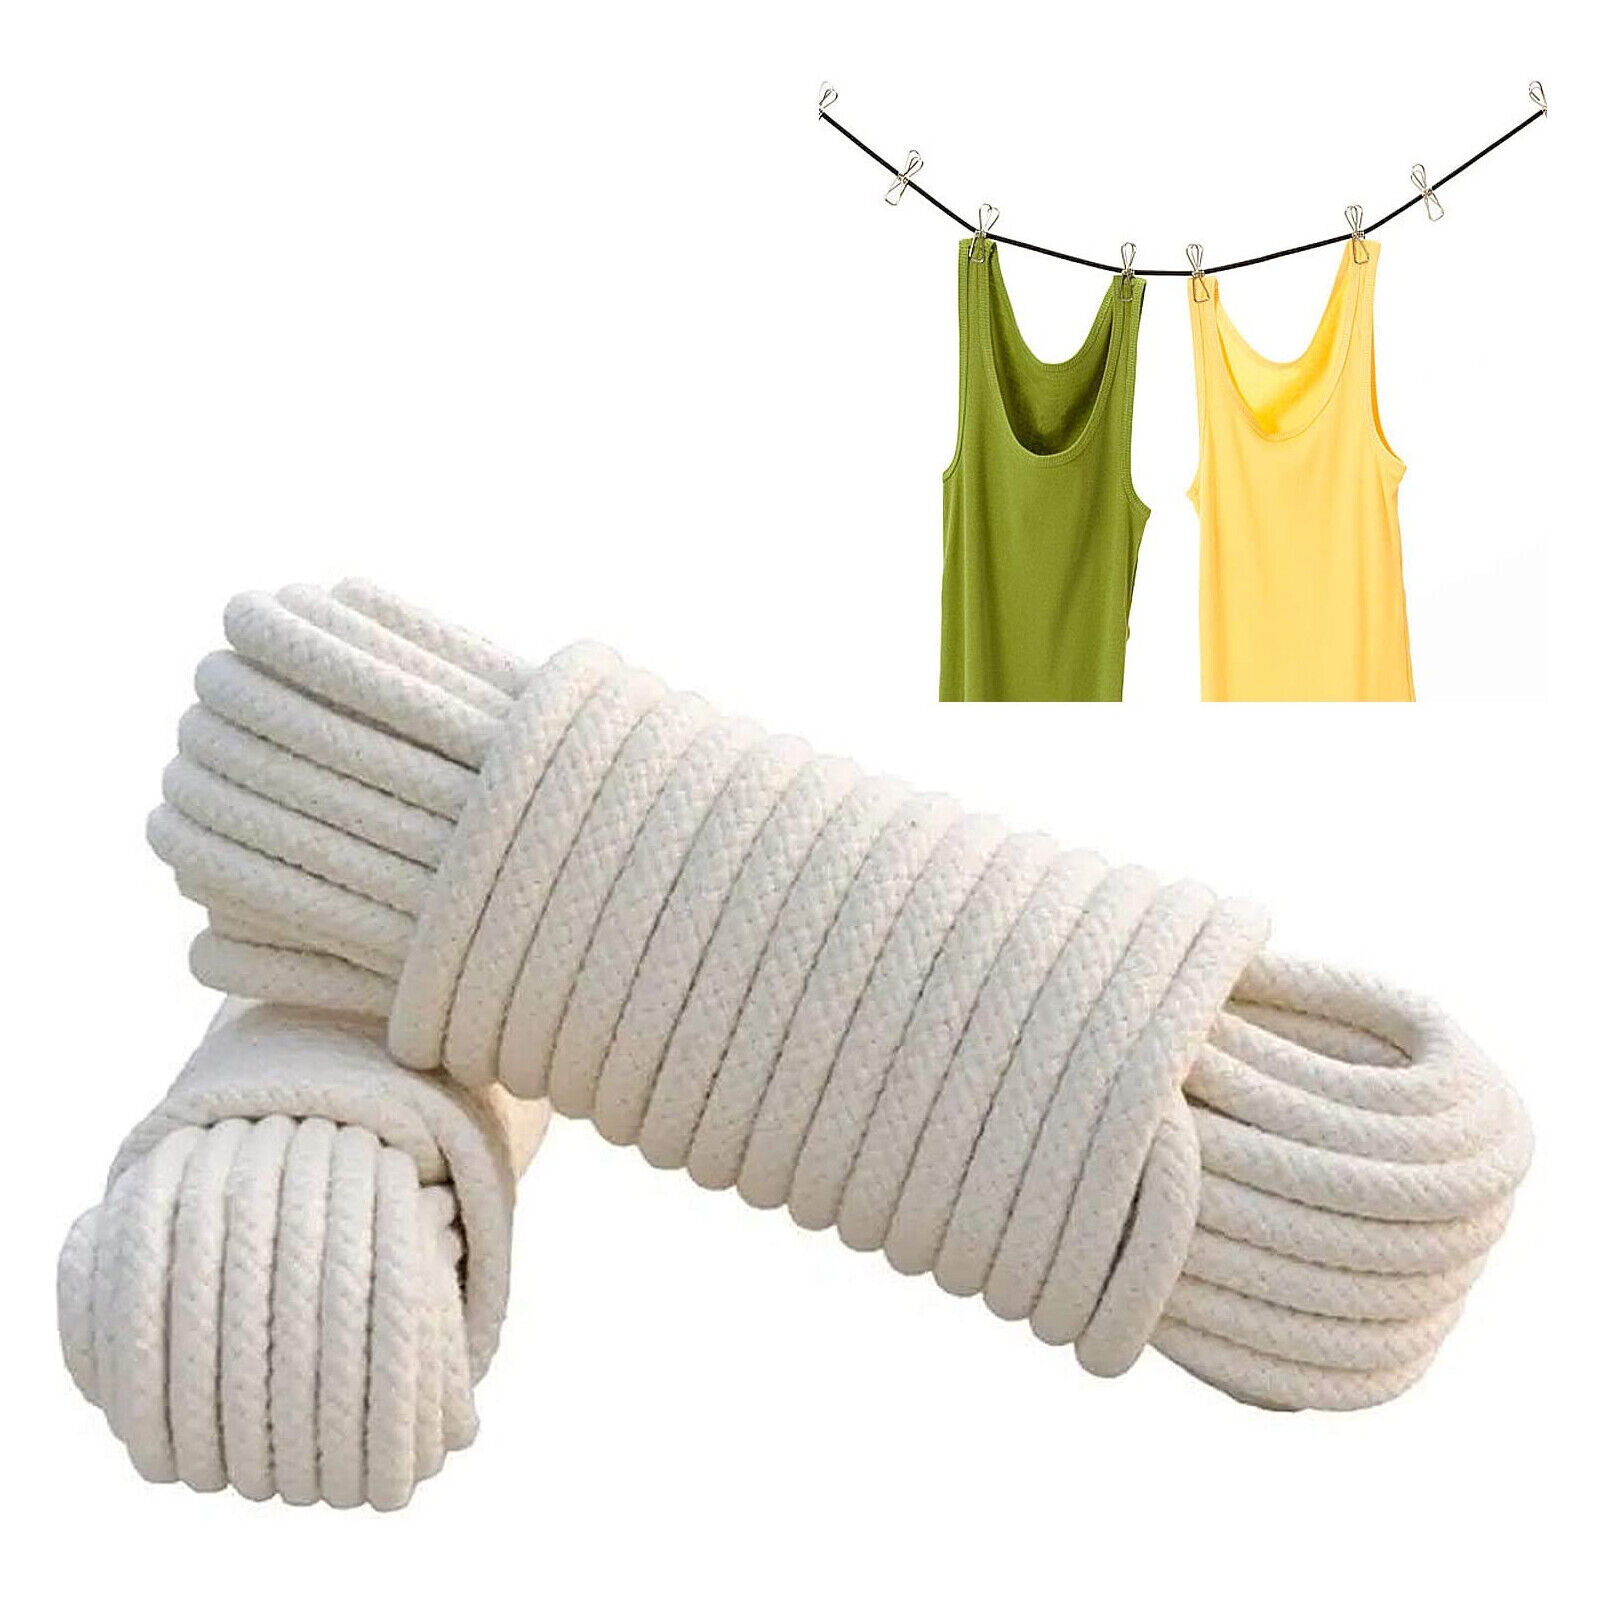 20 Meter Washing Line Cotton Rope Traditional Strong Washing Clothes Dryer Line Twine Hank Polley Jute